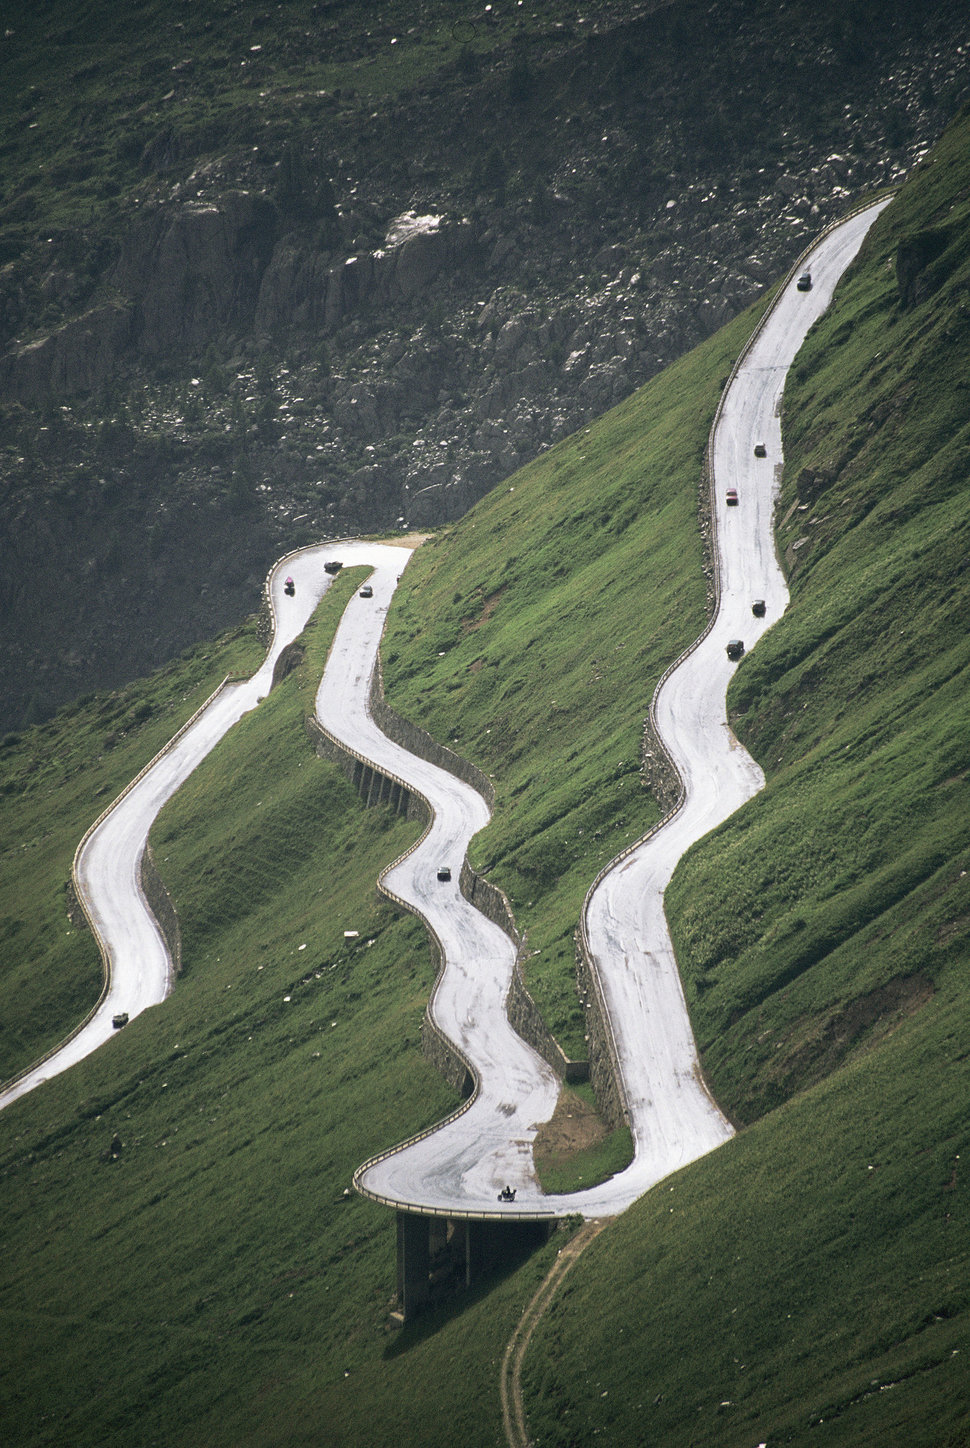 Furka Pass el. 2436 m.) is a high mountain pass in the Swiss Alps connecting Gletsch, Valais with Realp, Uri. There is a road with sharp hairpin bends.